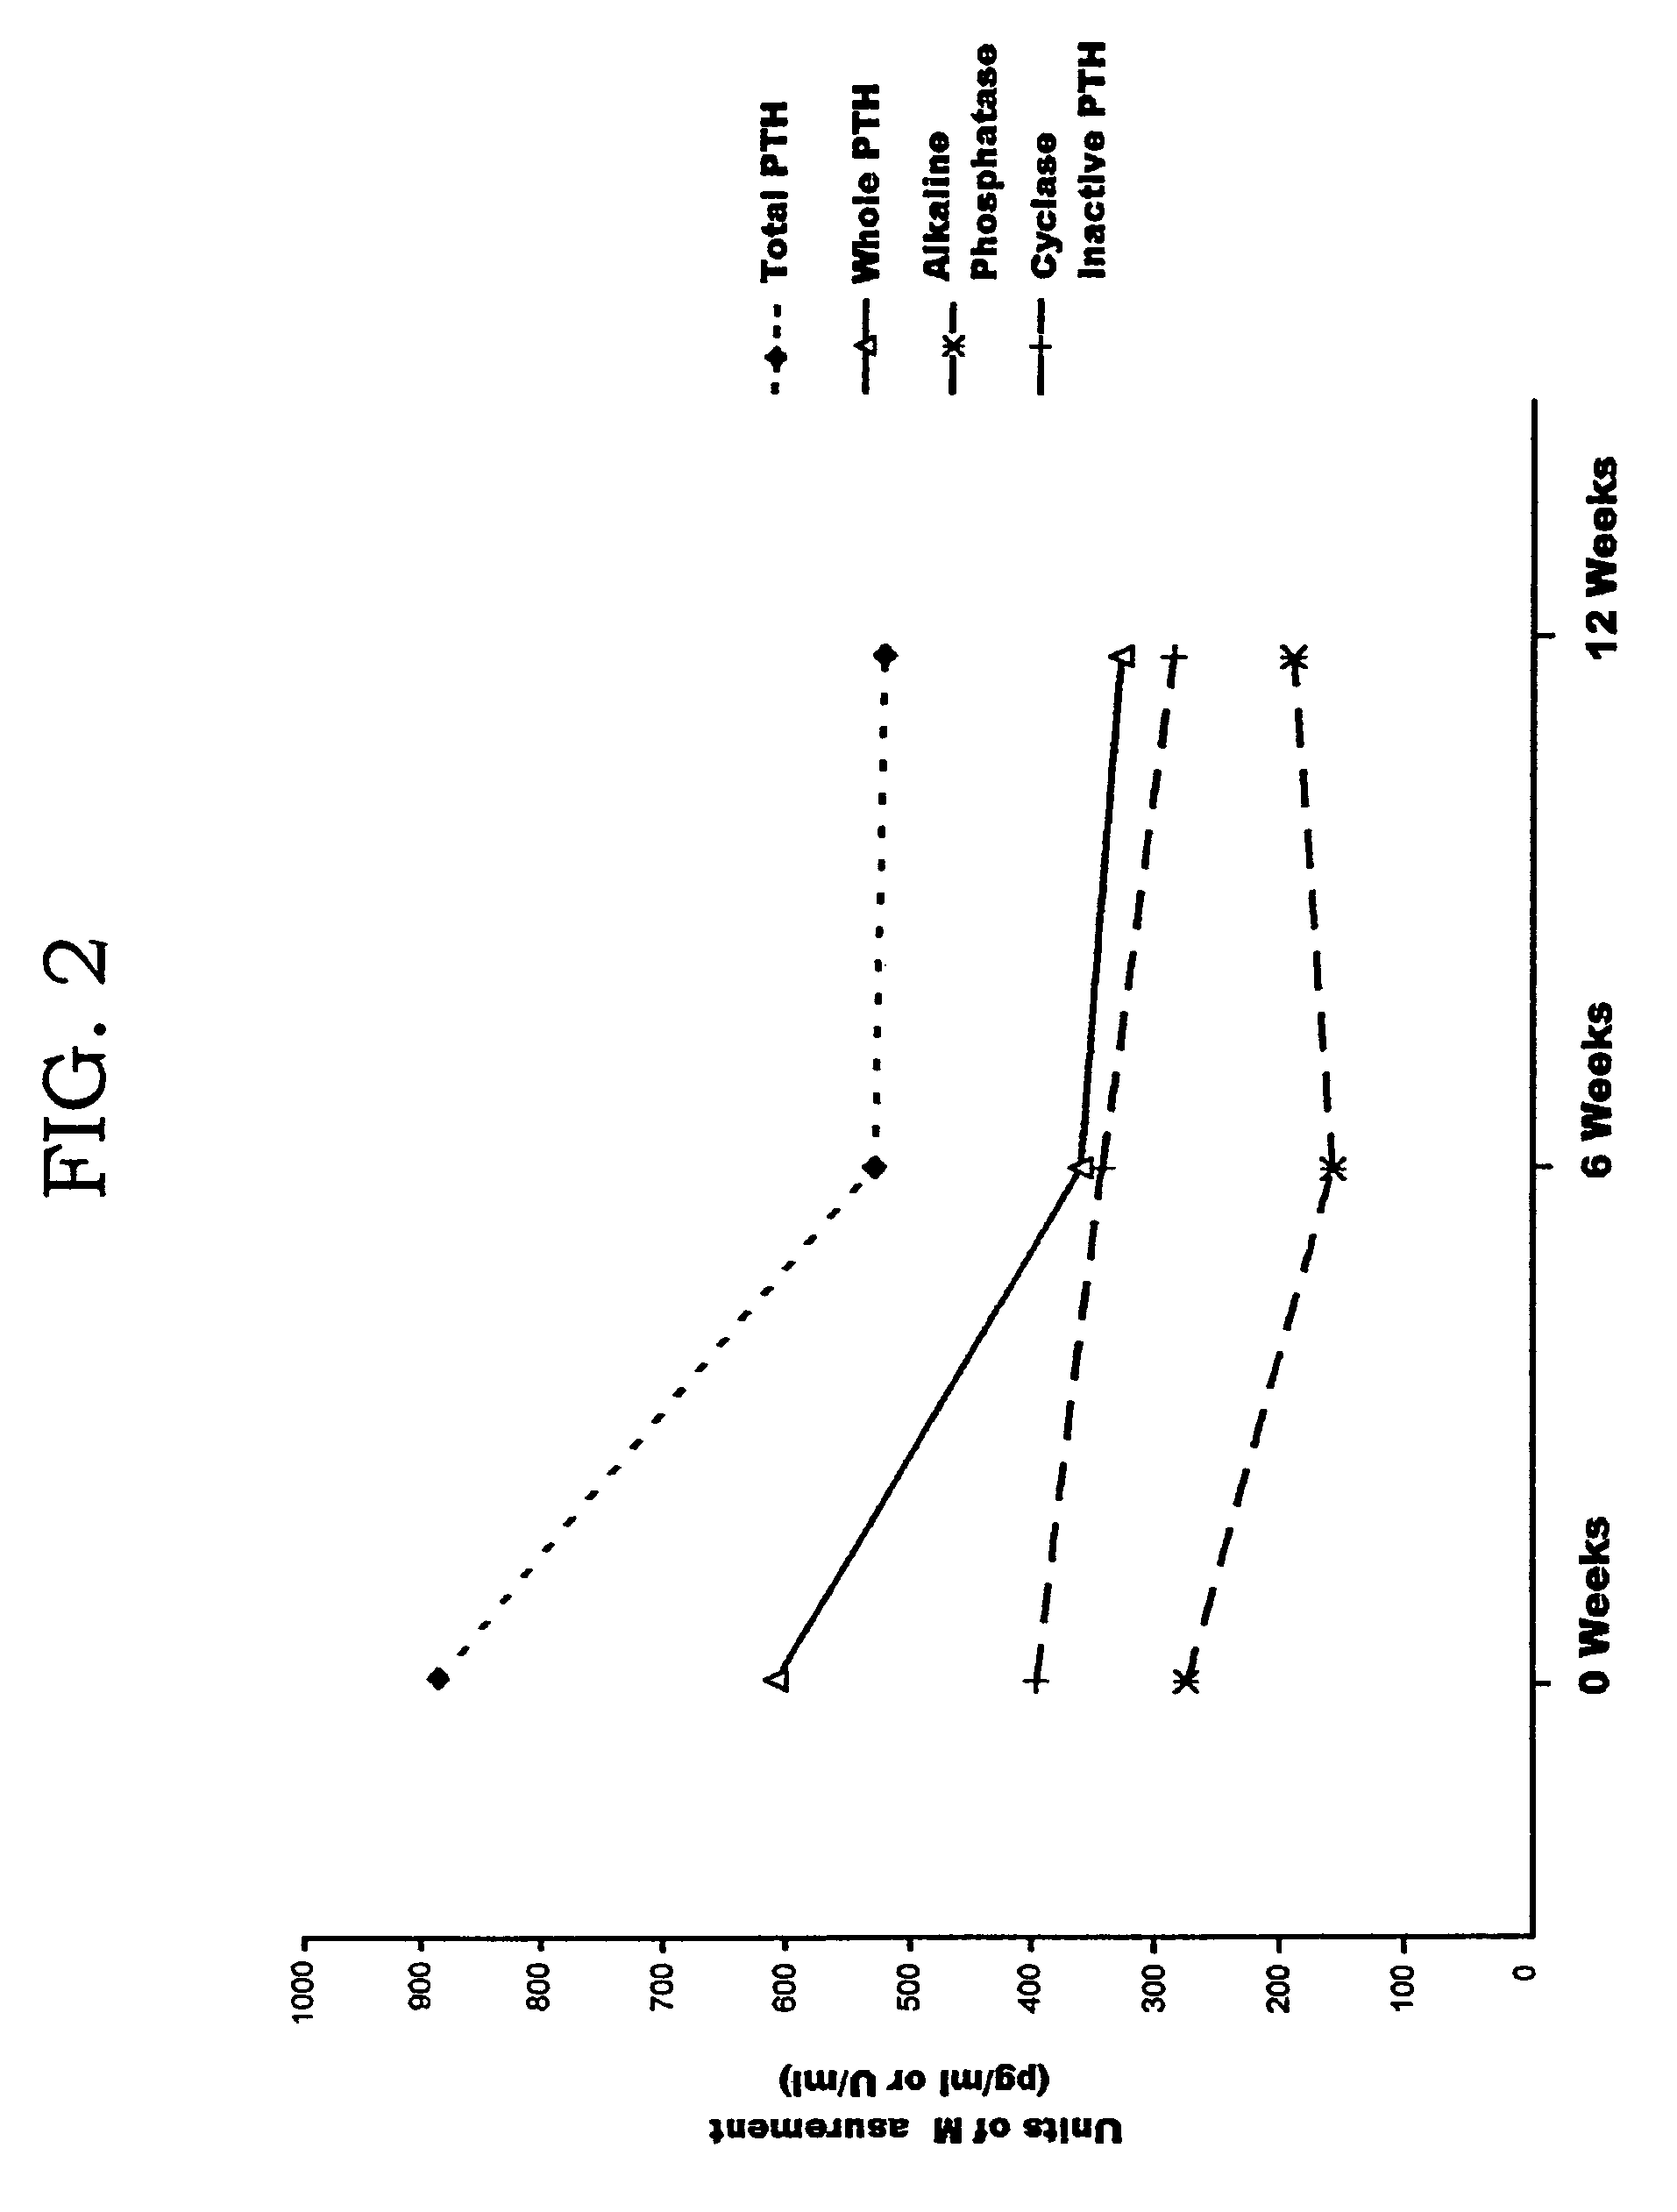 Methods and controls for monitoring assay quality and accuracy in parathyroid hormone measurement